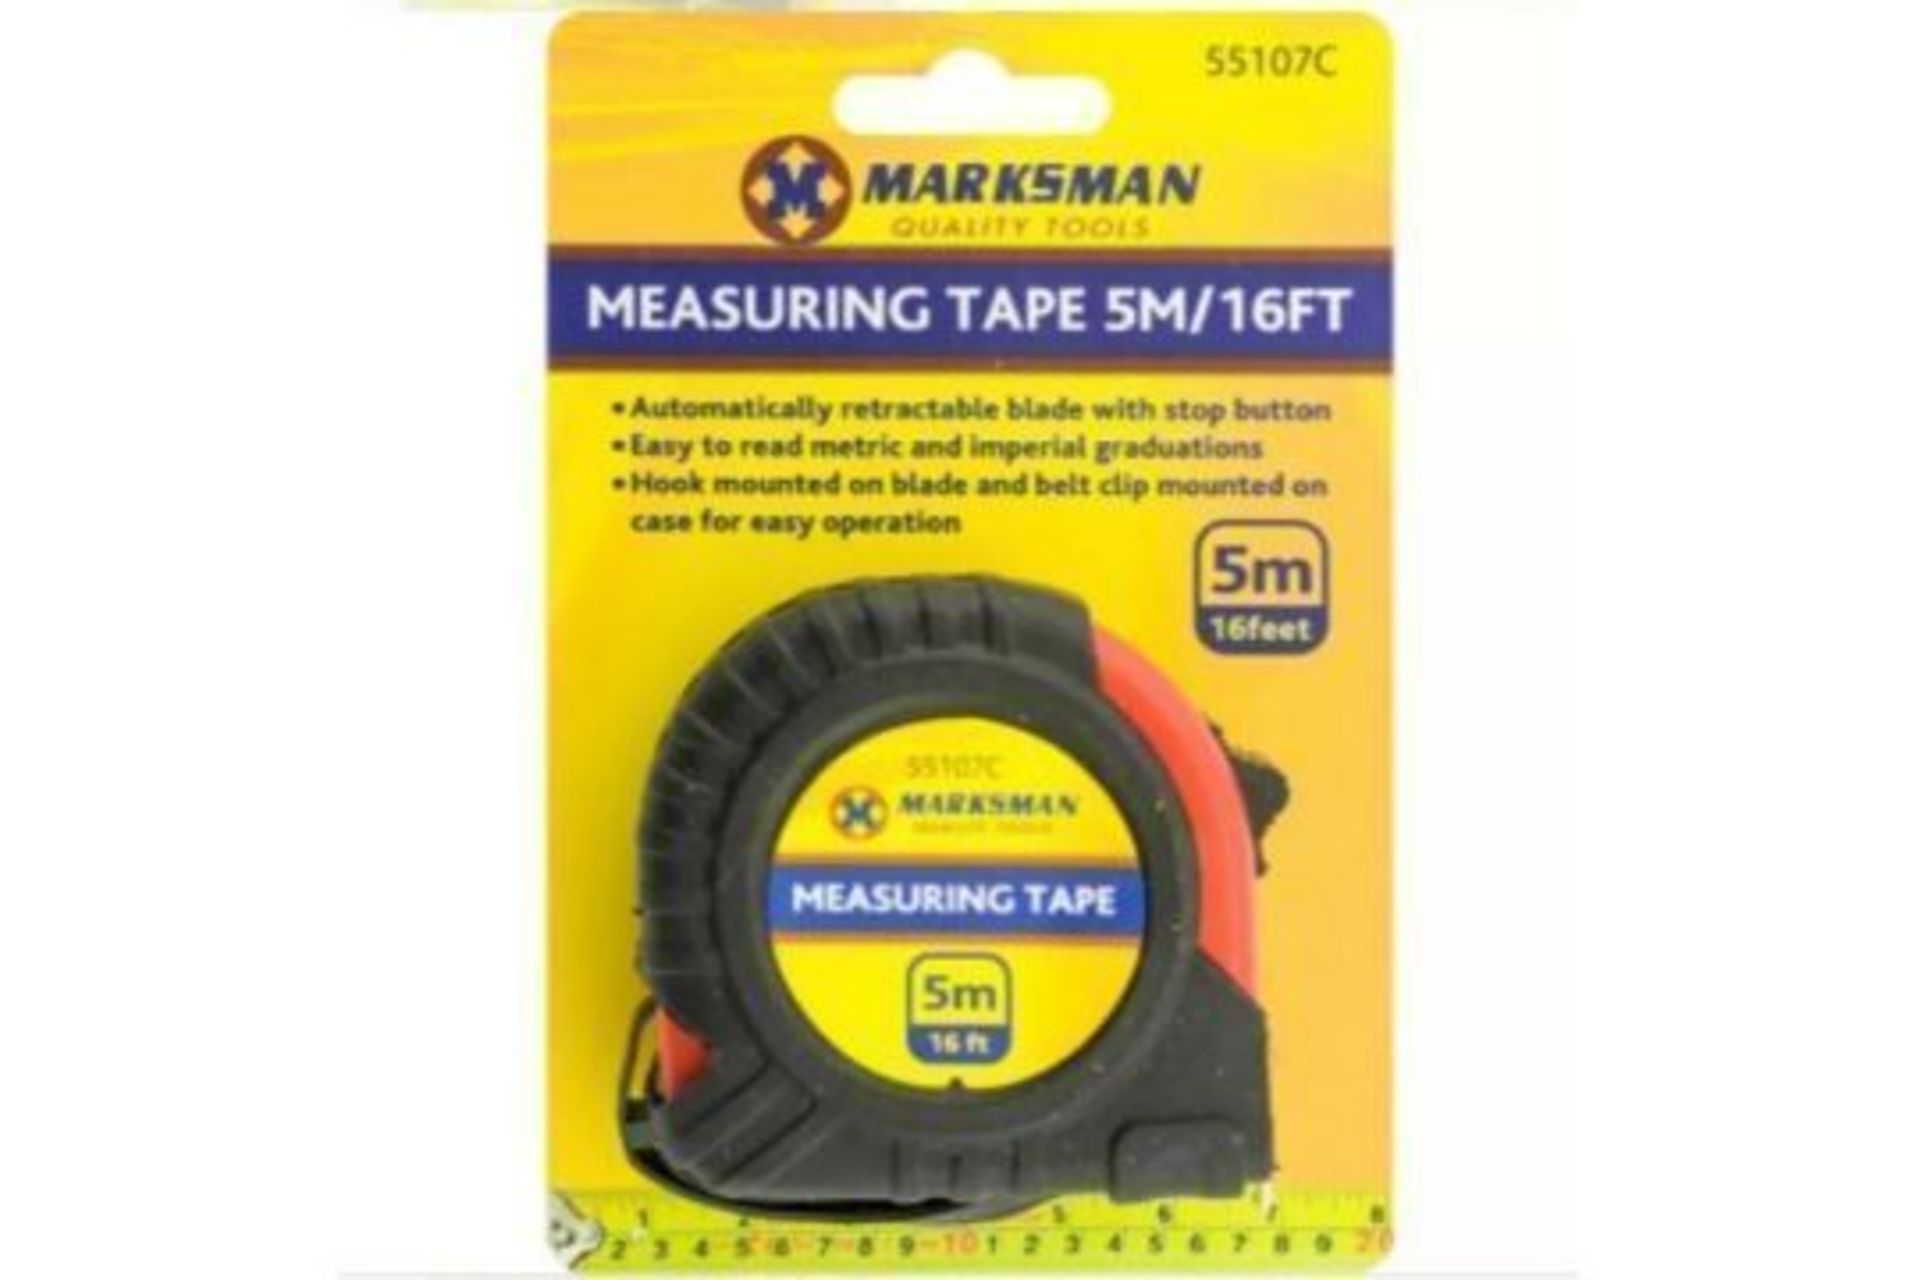 X2 Marksman 5m Tape Measure (colour may vary)